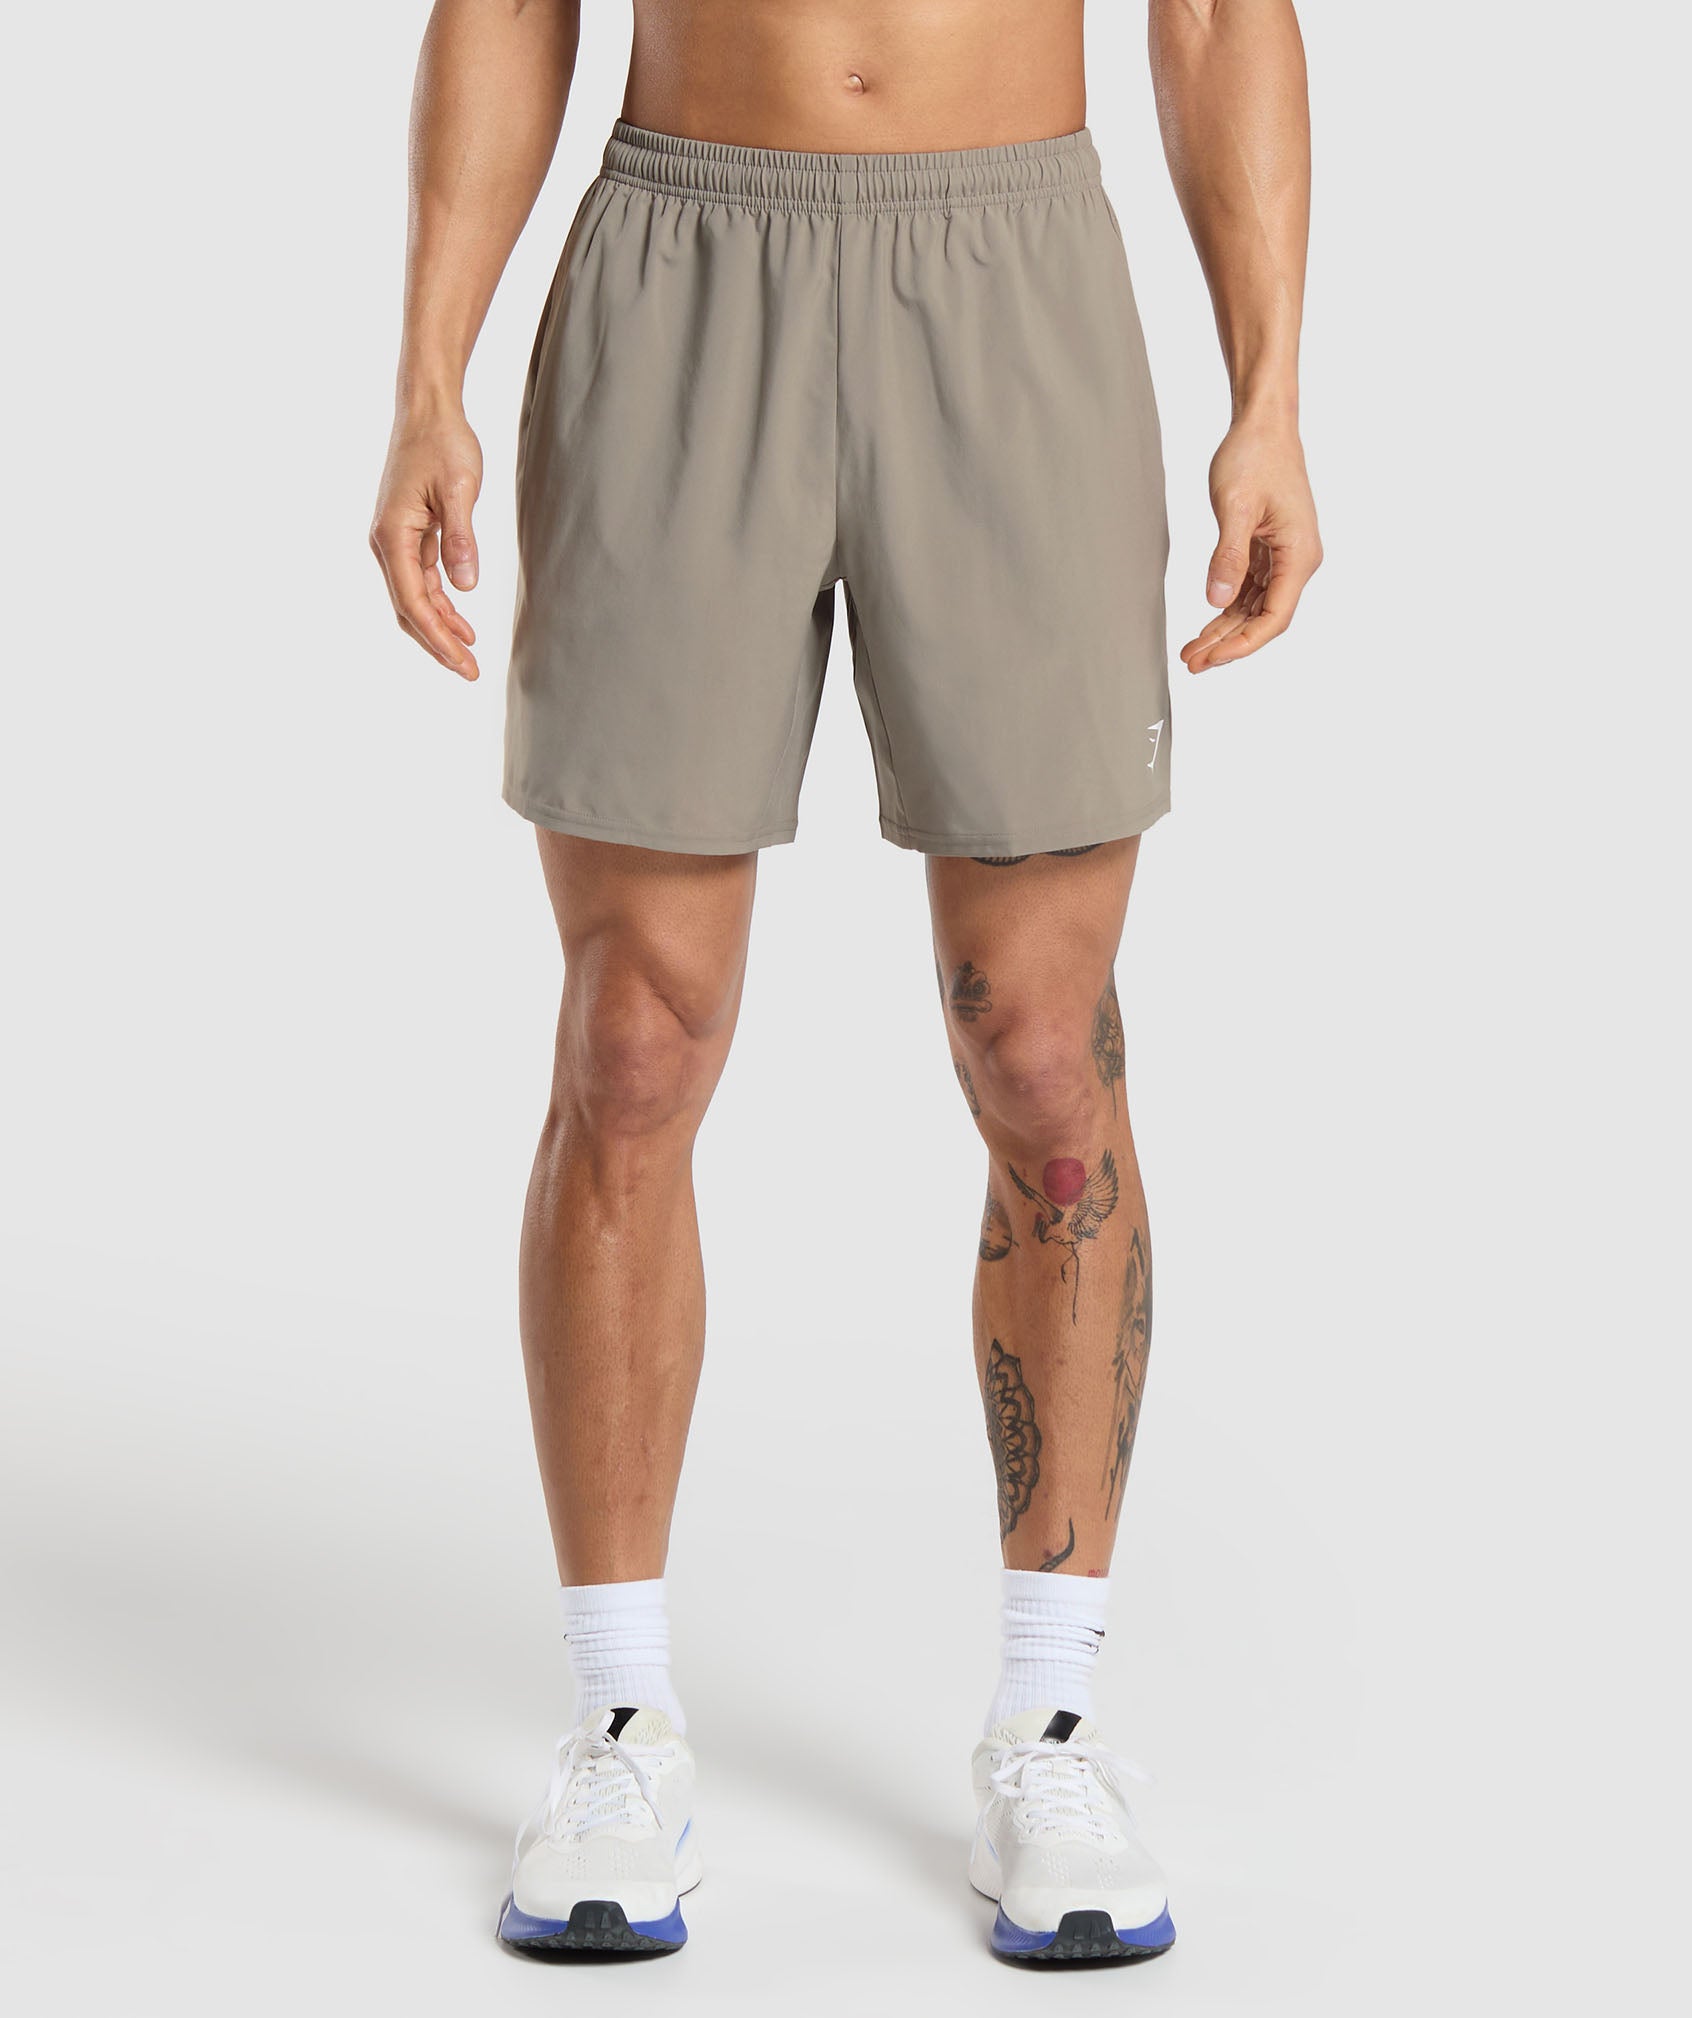 Arrival 7" Shorts in Linen Brown - view 1